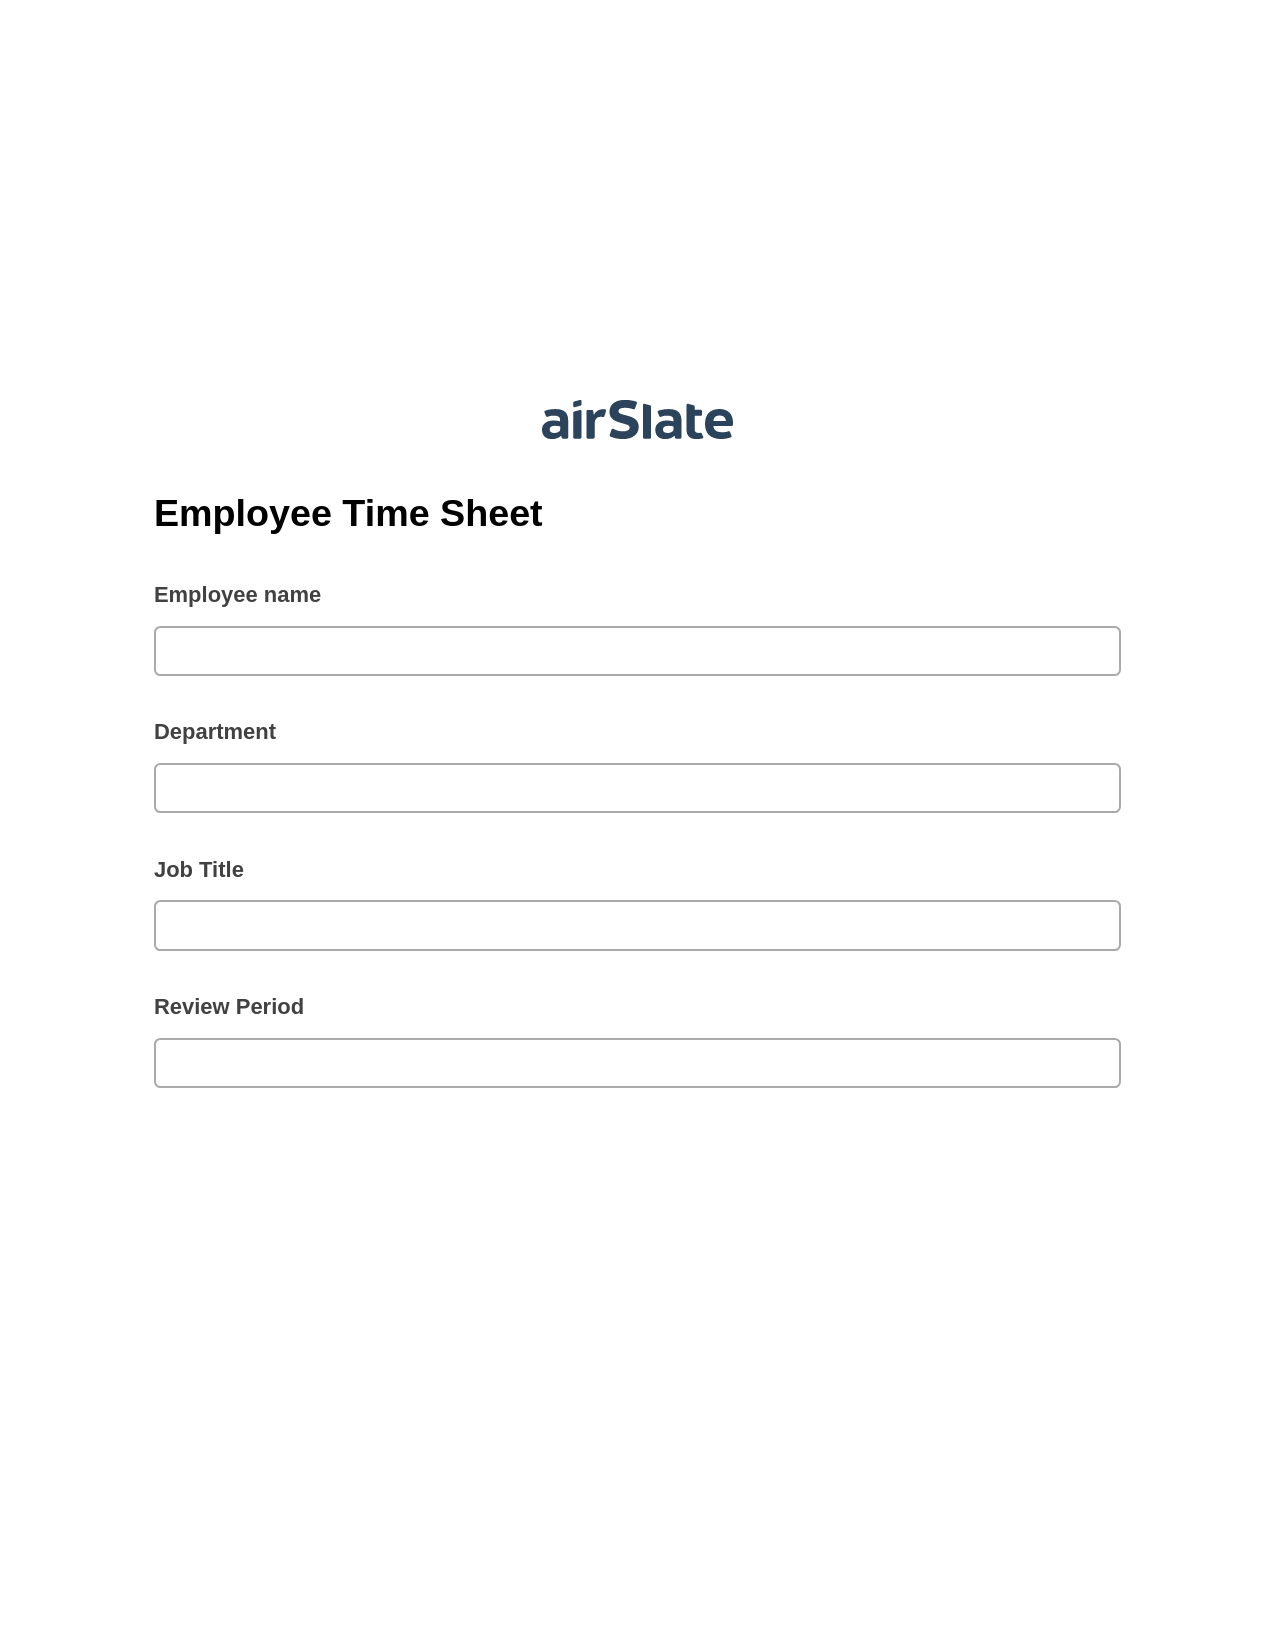 Employee Time Sheet Pre-fill from Excel Spreadsheet Bot, Create Salesforce Records Bot, Export to WebMerge Bot